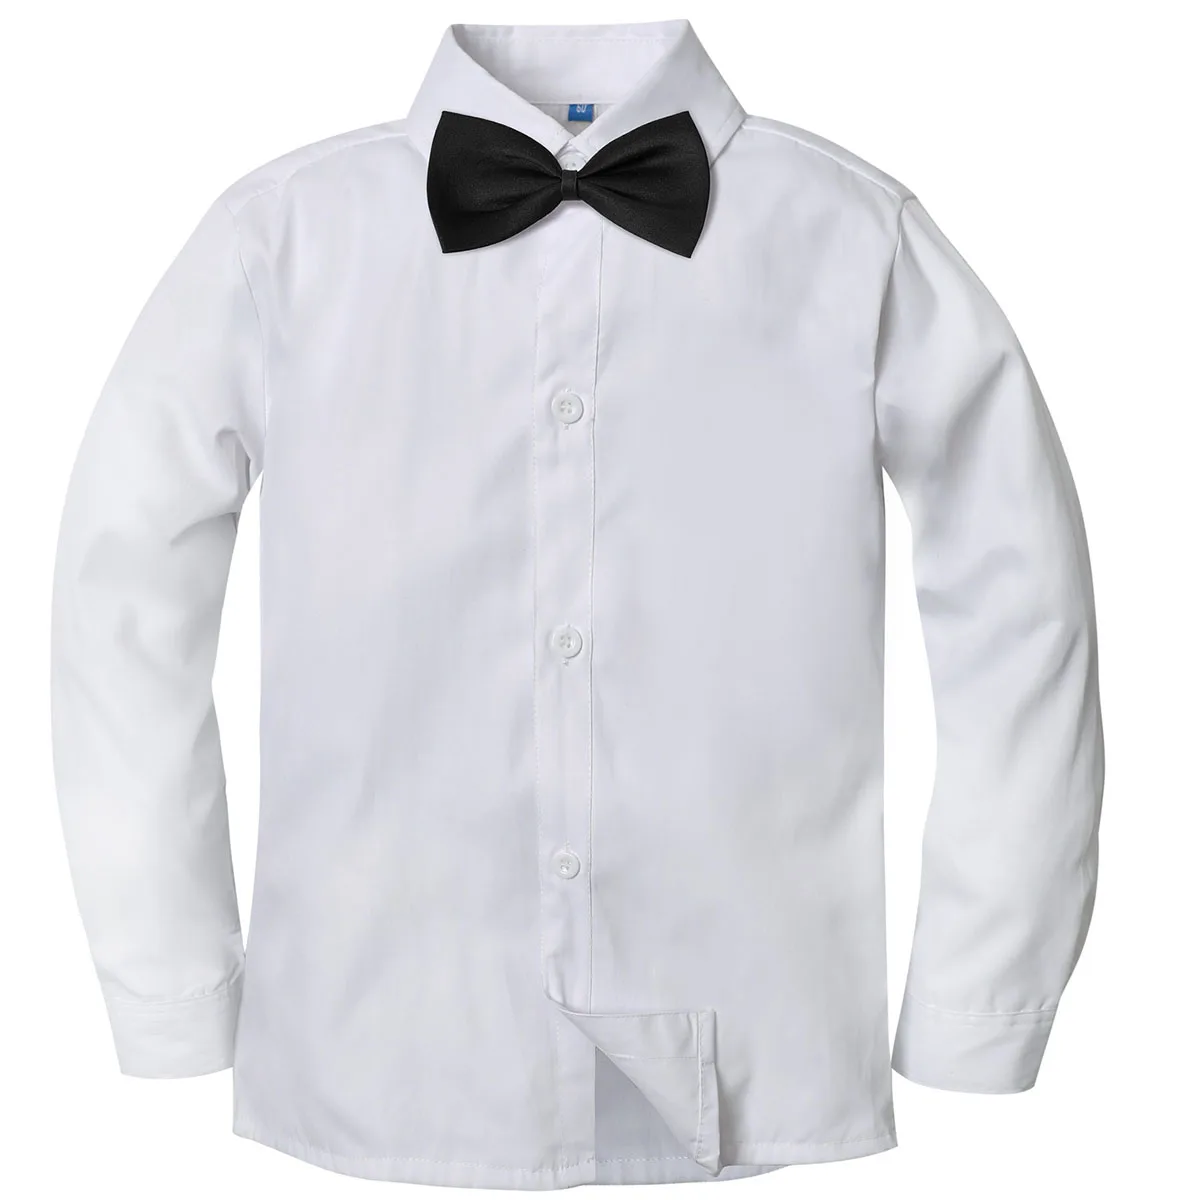 

Boys Dress Shirt Kids School Uniform Long Sleeve with Bowtie Formal Gentelmal Gift Perform Ceremony Clothes White 7 to 16 years